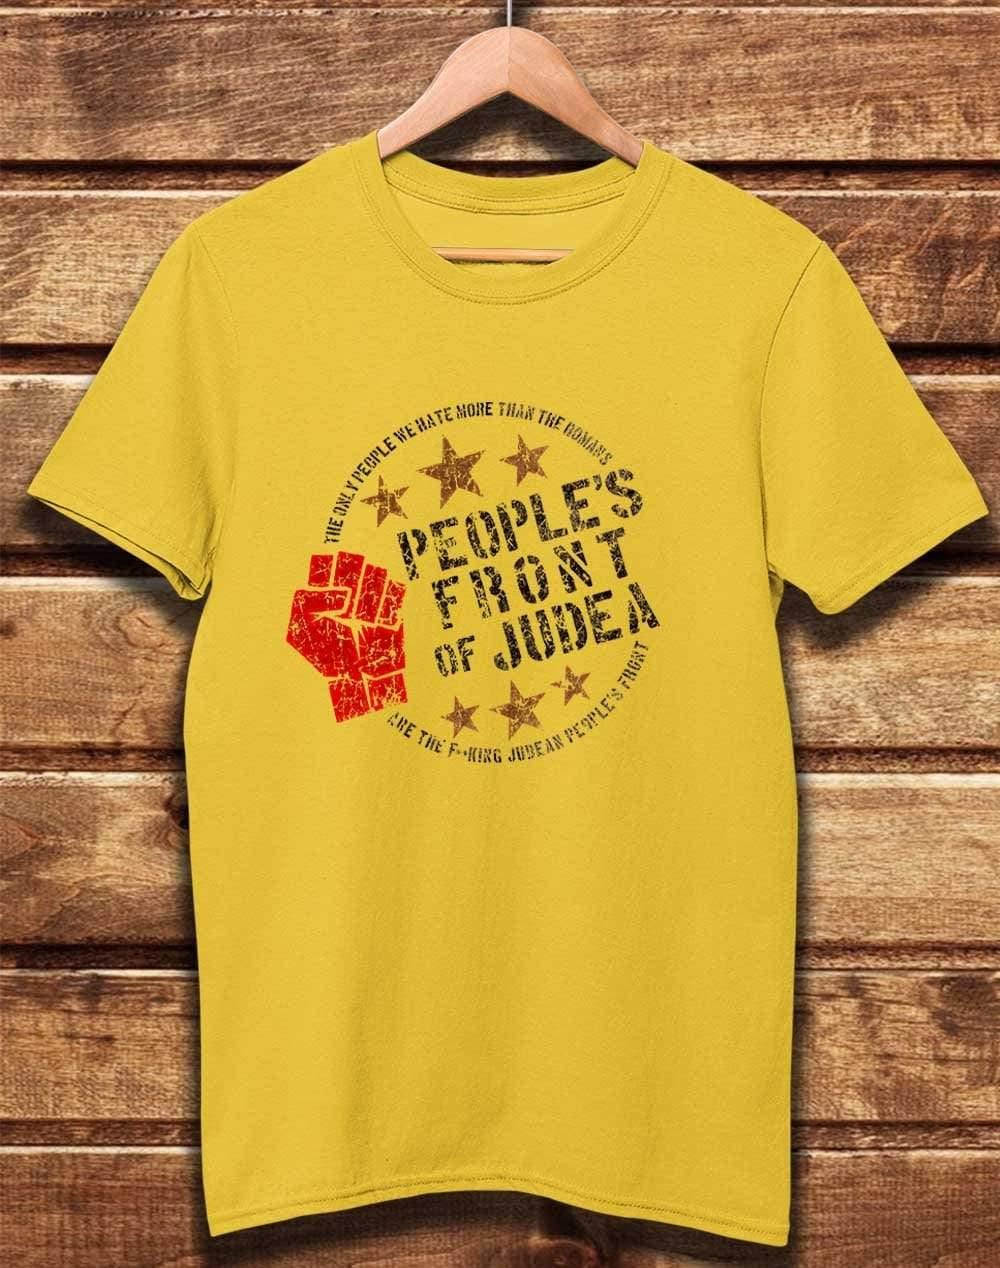 DELUXE People's Front of Judea Organic Cotton T-Shirt S / Yellow  - Off World Tees